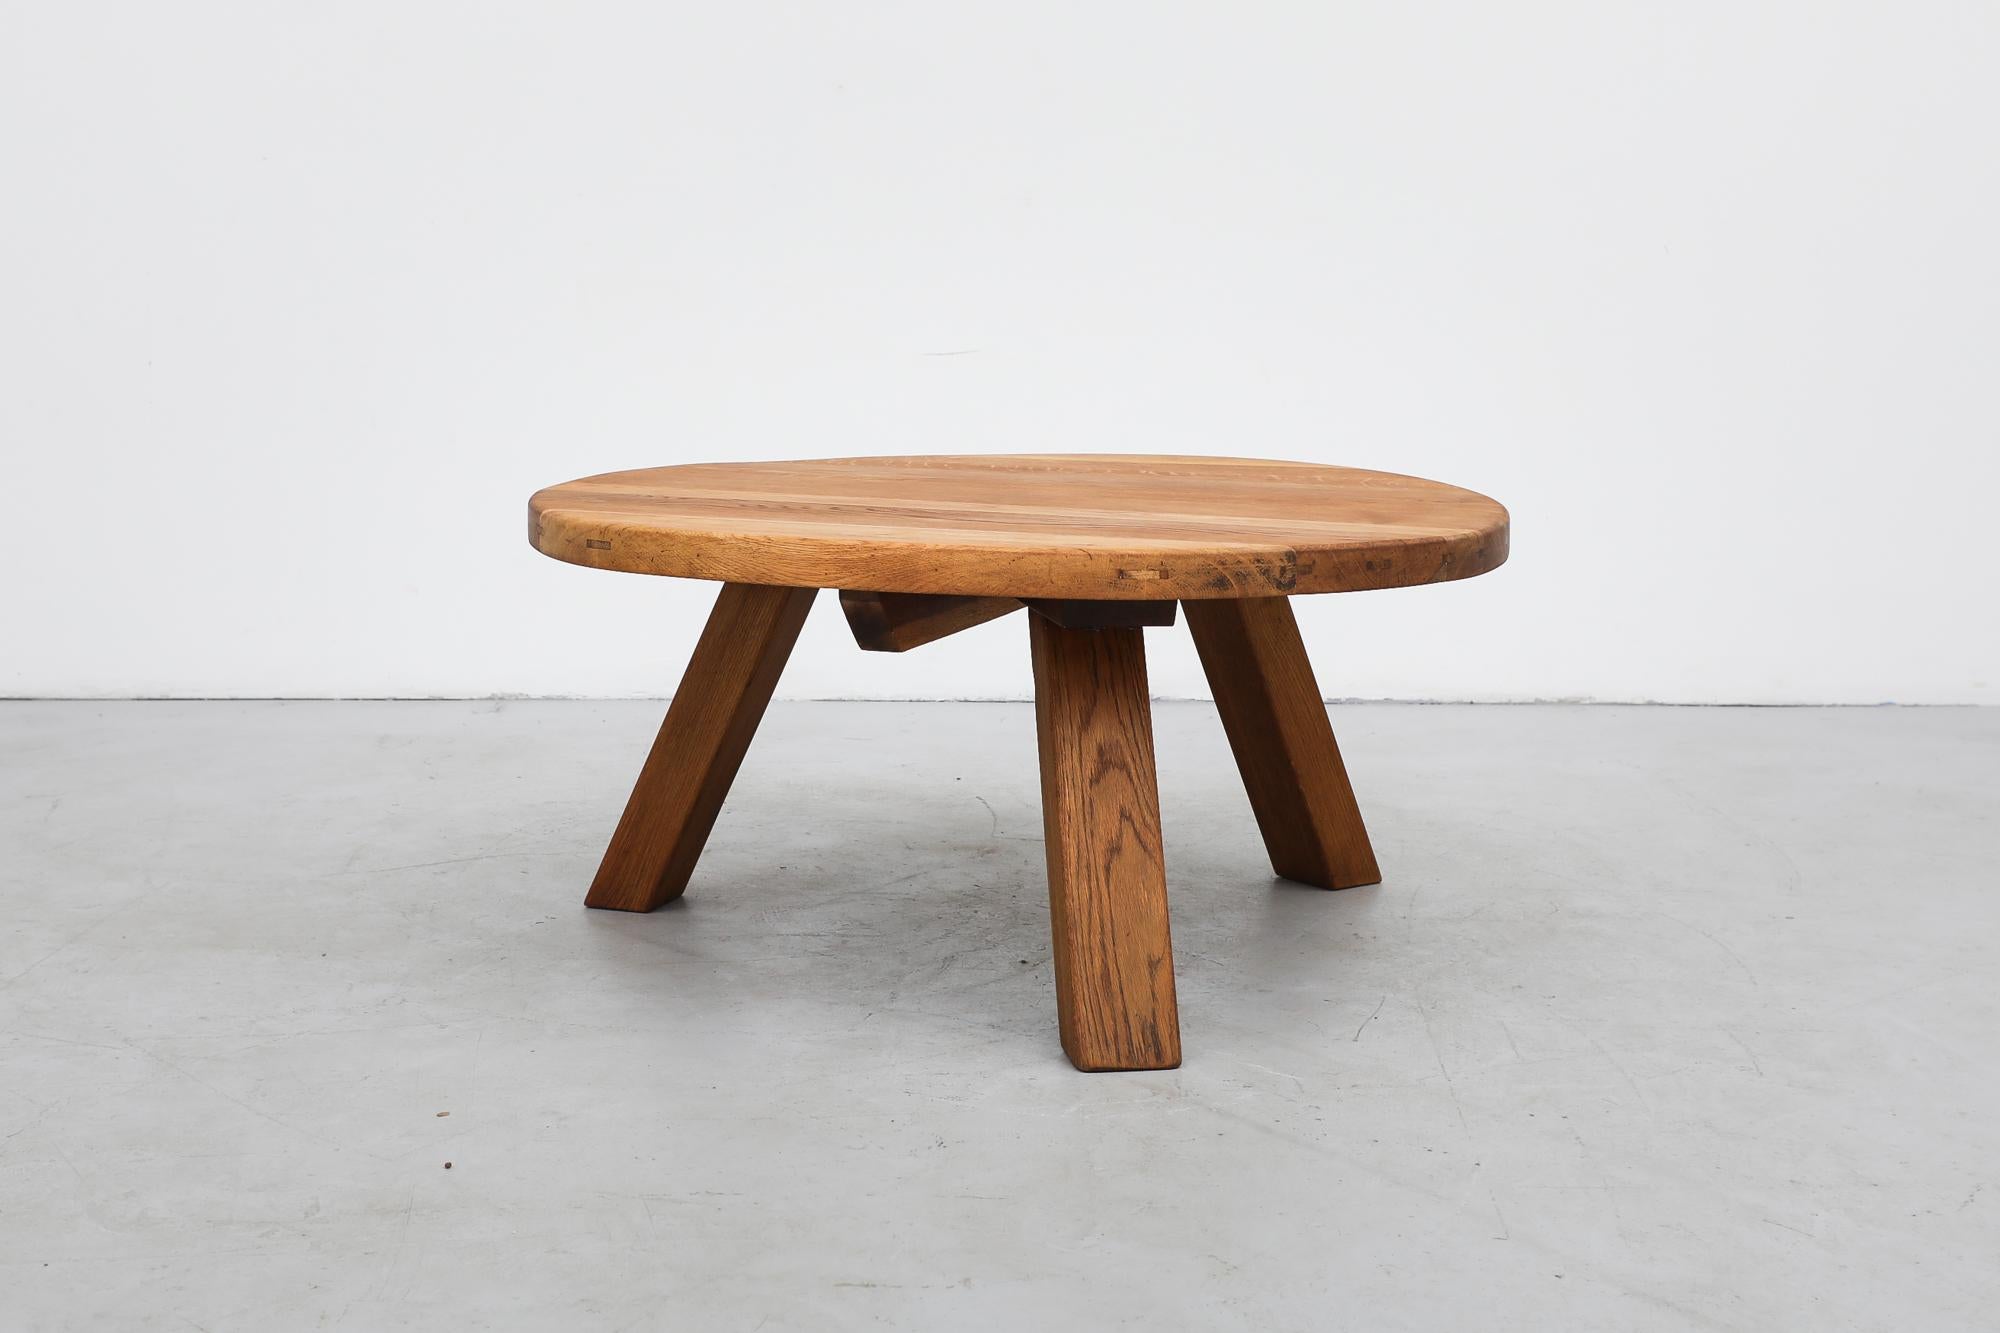 Brutalist heavy round coffee table is made from solid oak and has three sturdy square legs. In original condition with visible wear and patina consistent with its age and use.